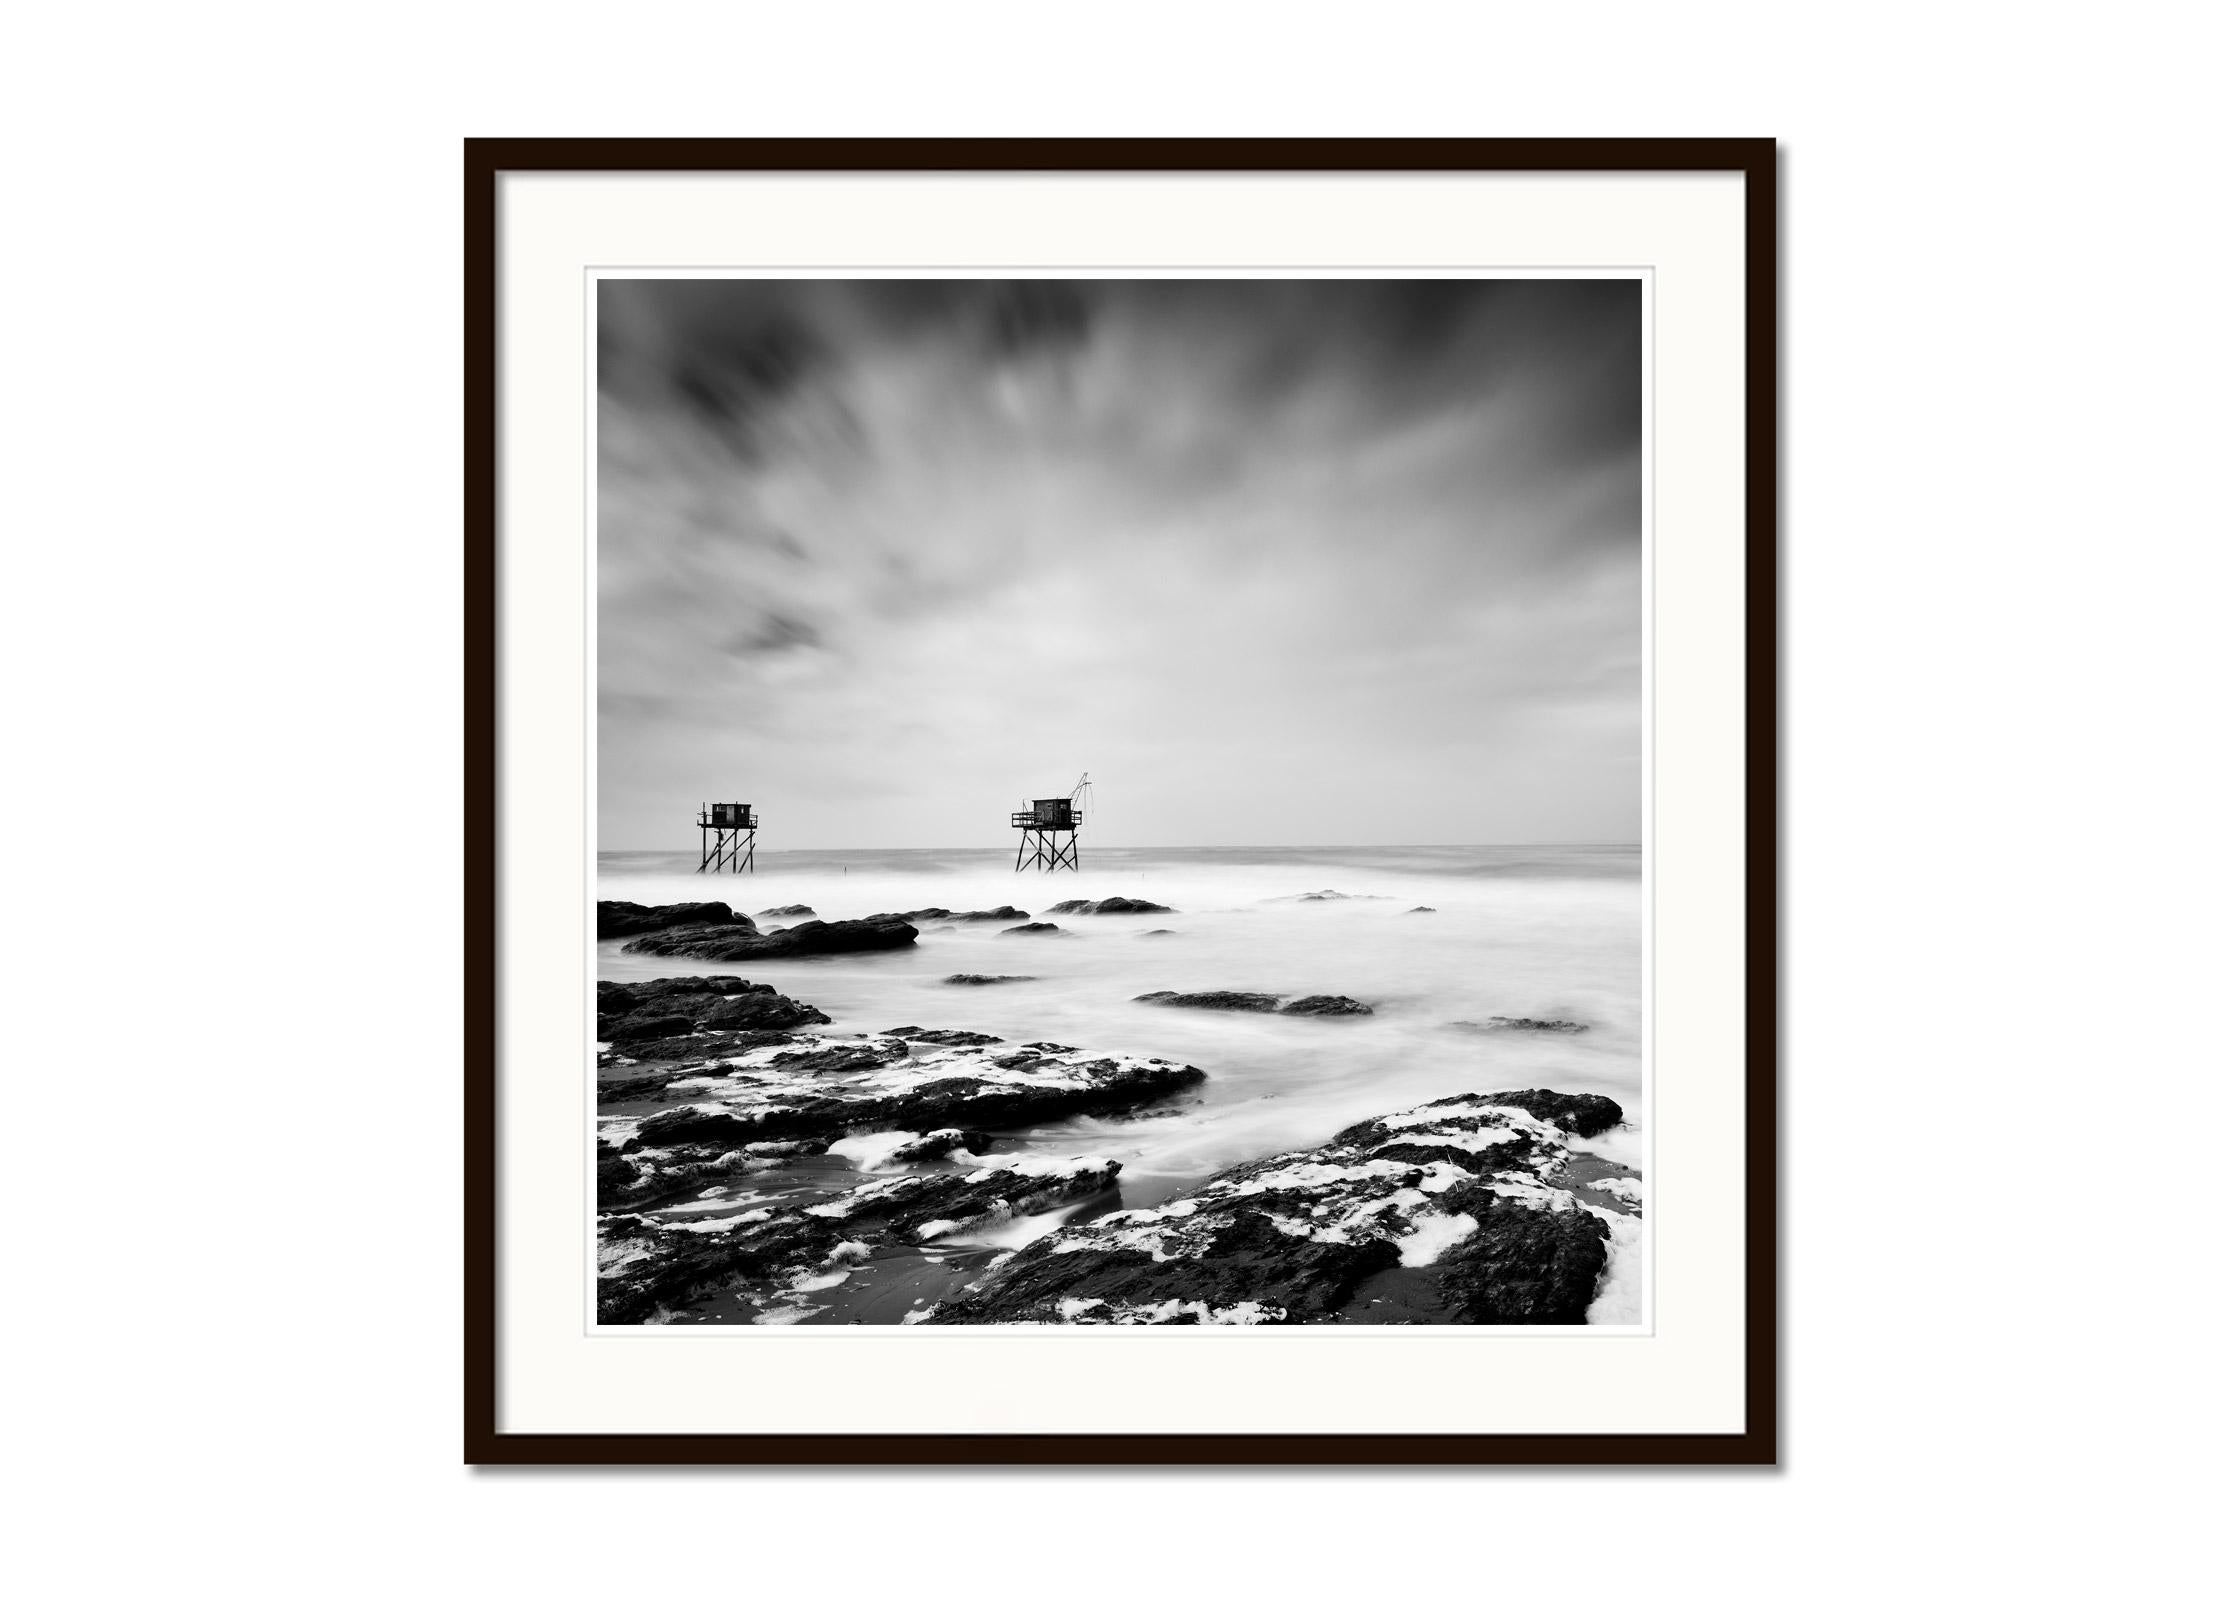 Fishing Hut on Stilts, coast of Atlantic Ocean, black and white waterscape - Gray Black and White Photograph by Gerald Berghammer